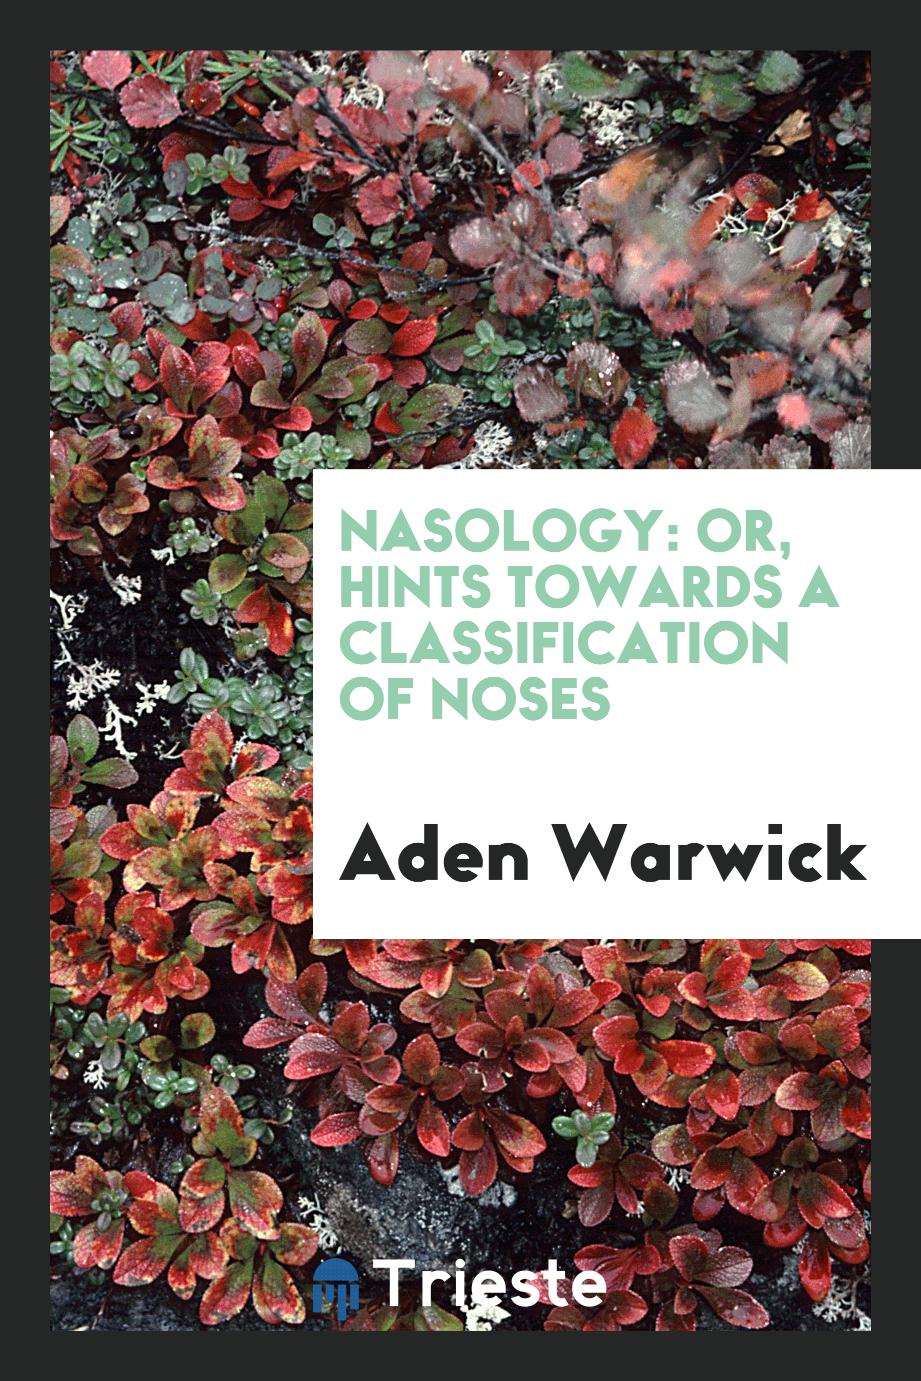 Nasology: or, Hints towards a classification of noses